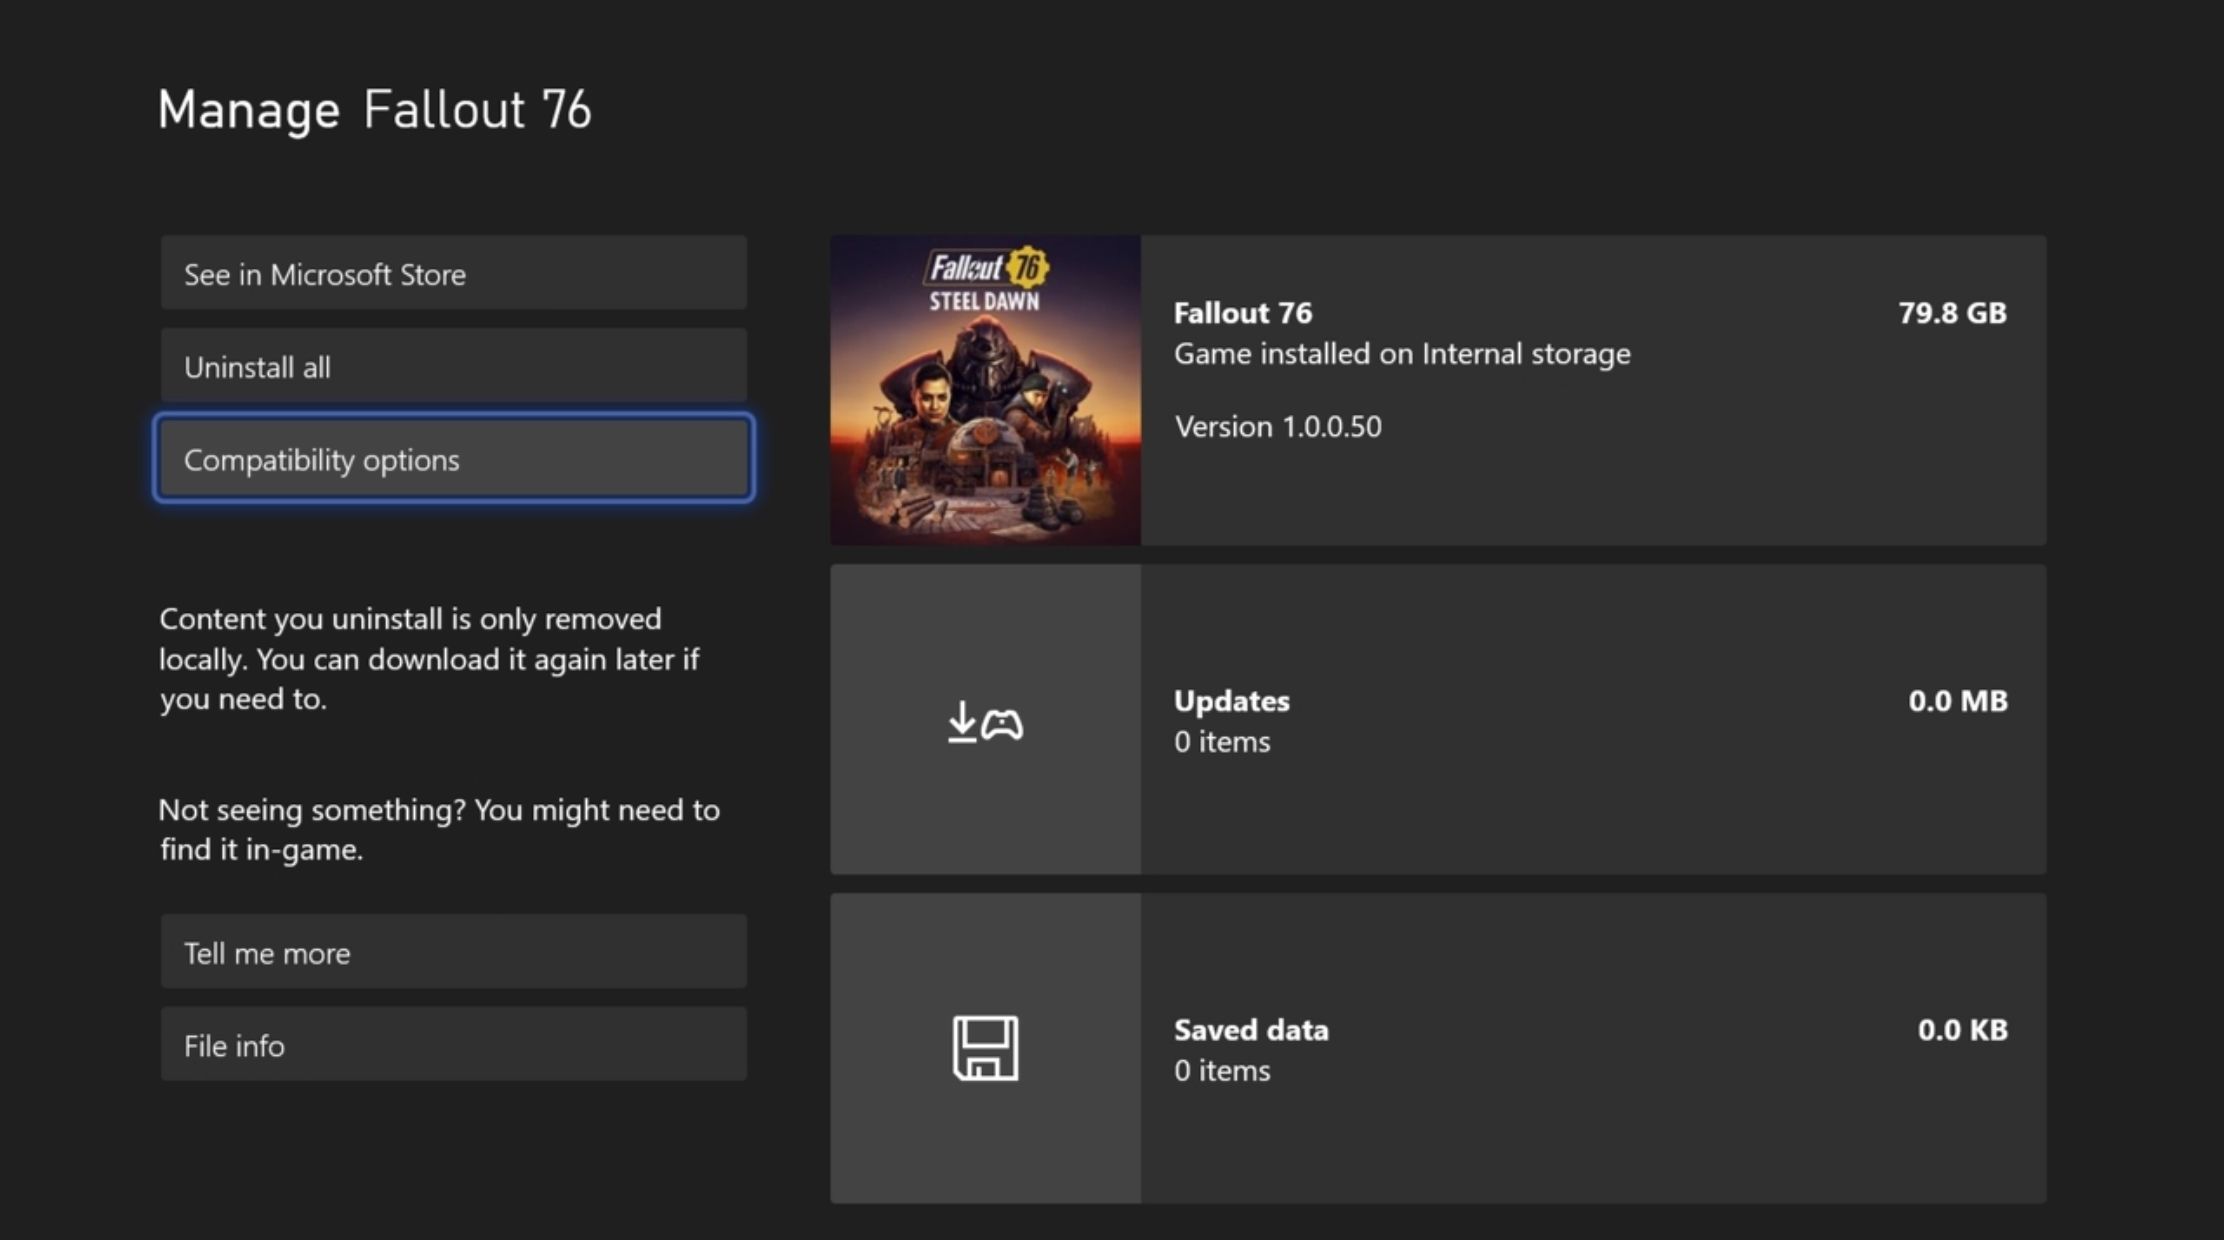 fallout 76 options list for managing the game